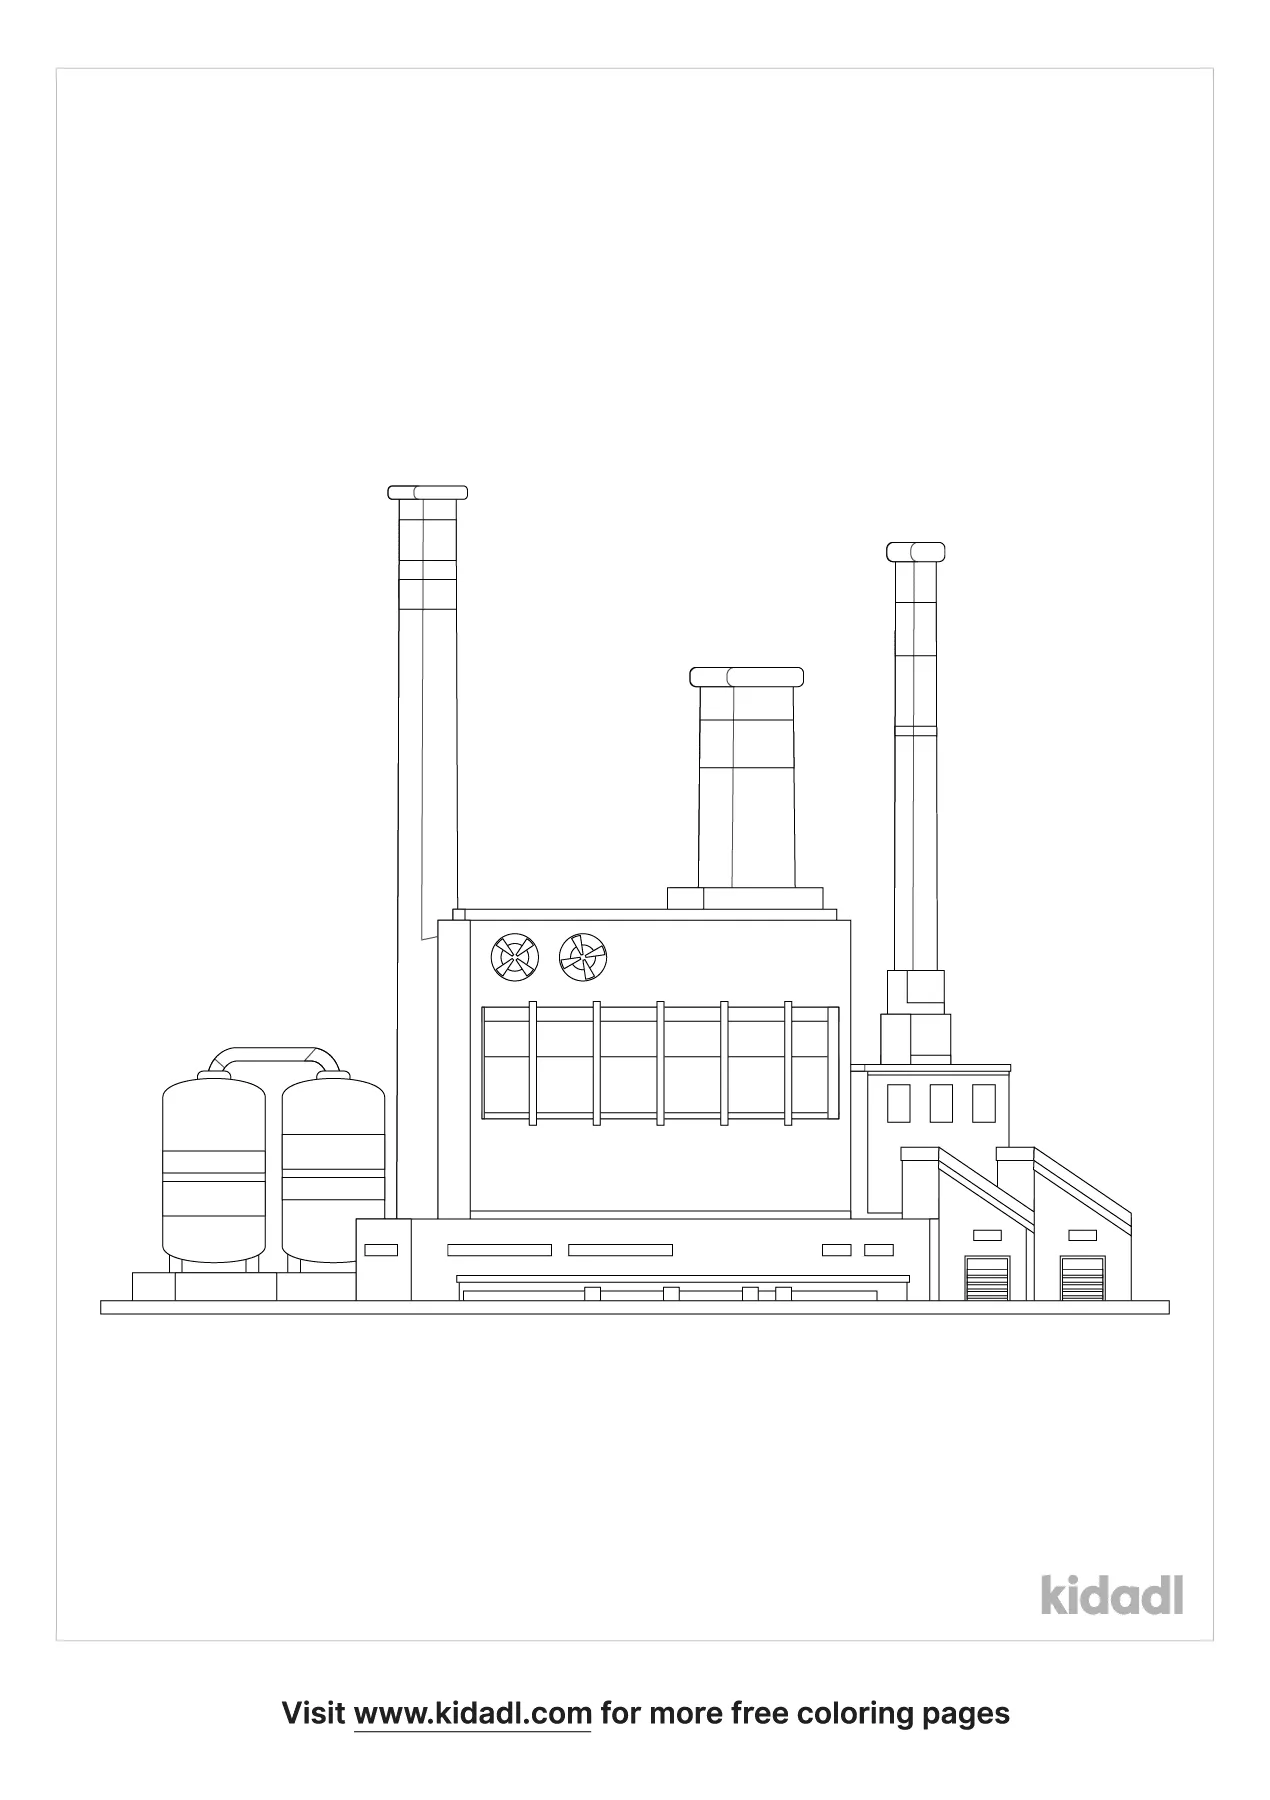 industrial revolution coloring pages